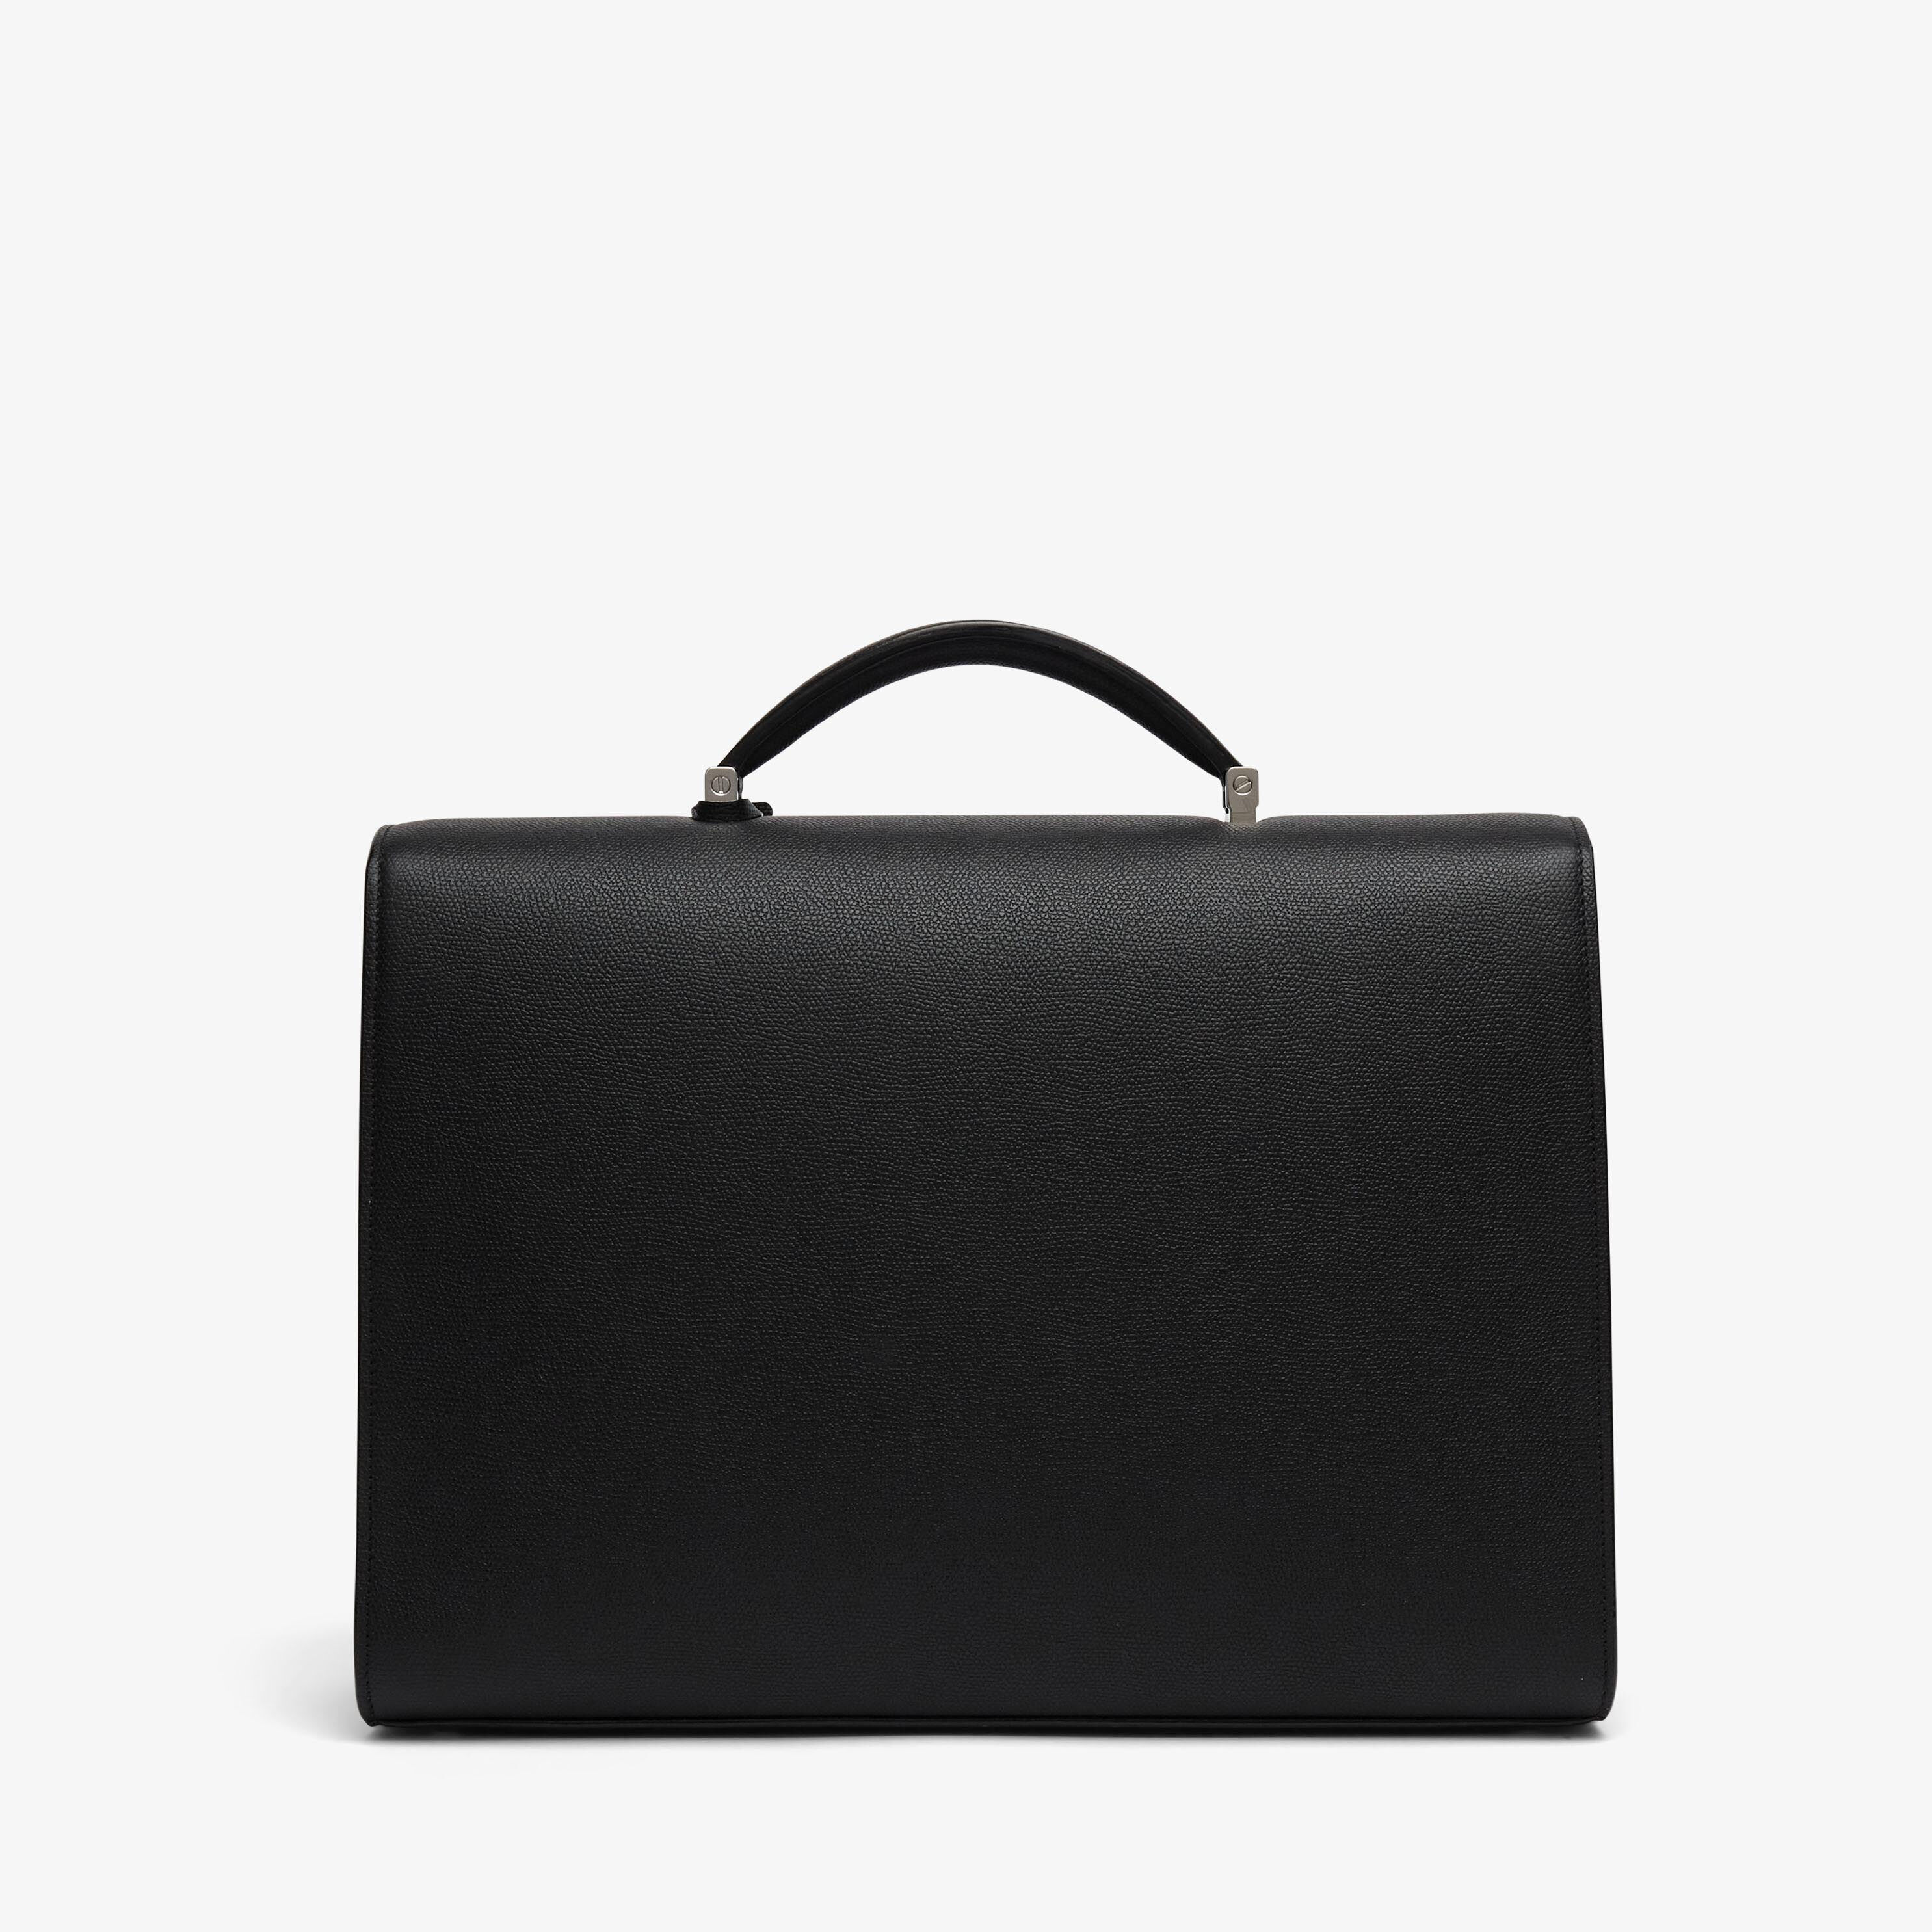 Men's Black Grained Leather Luxury briefcase | Valextra Iside